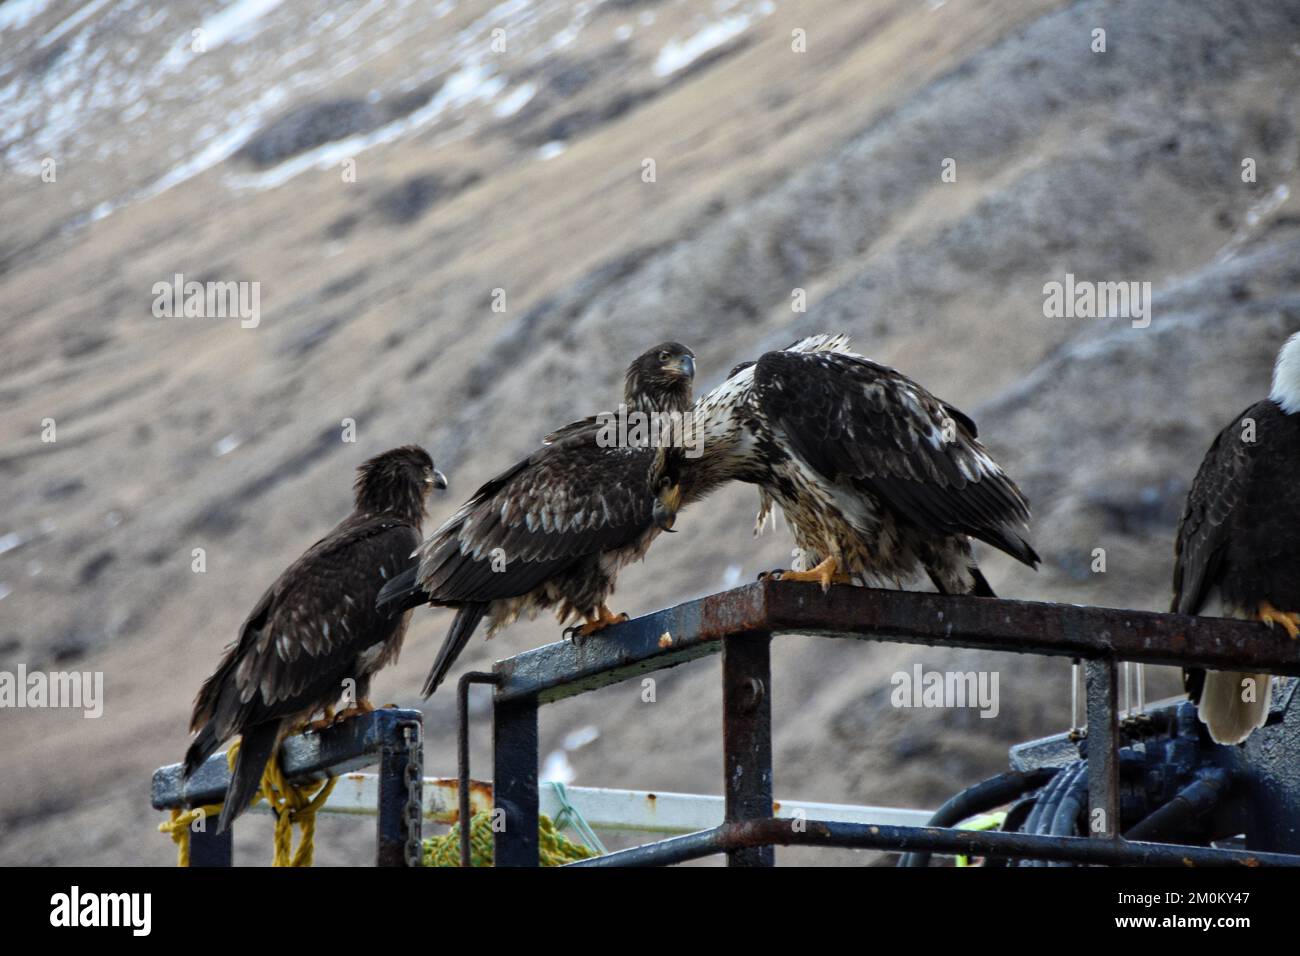 A view of the alaskan gold eagles perched on a metallic pole Stock Photo